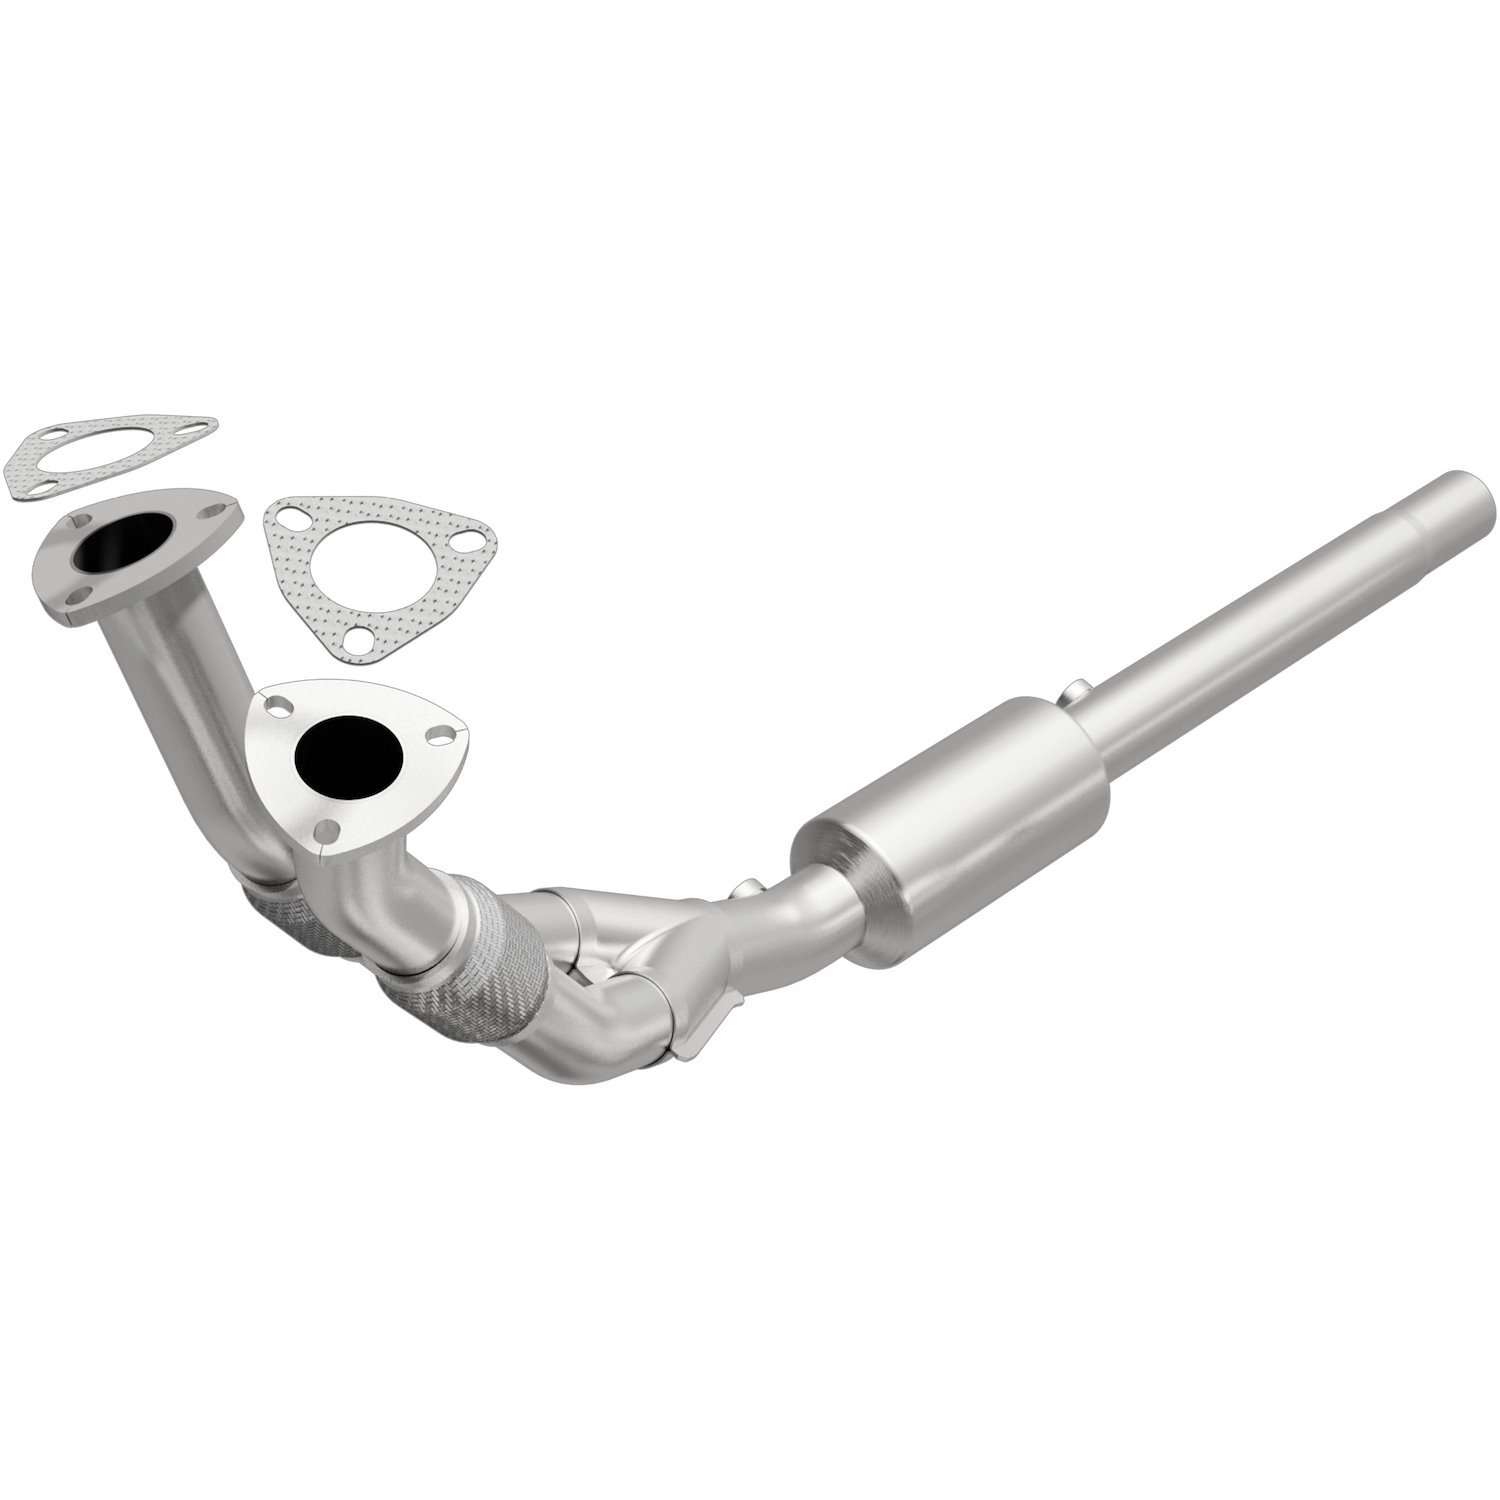 OEM Grade Federal / EPA Compliant Direct-Fit Catalytic Converter 51151